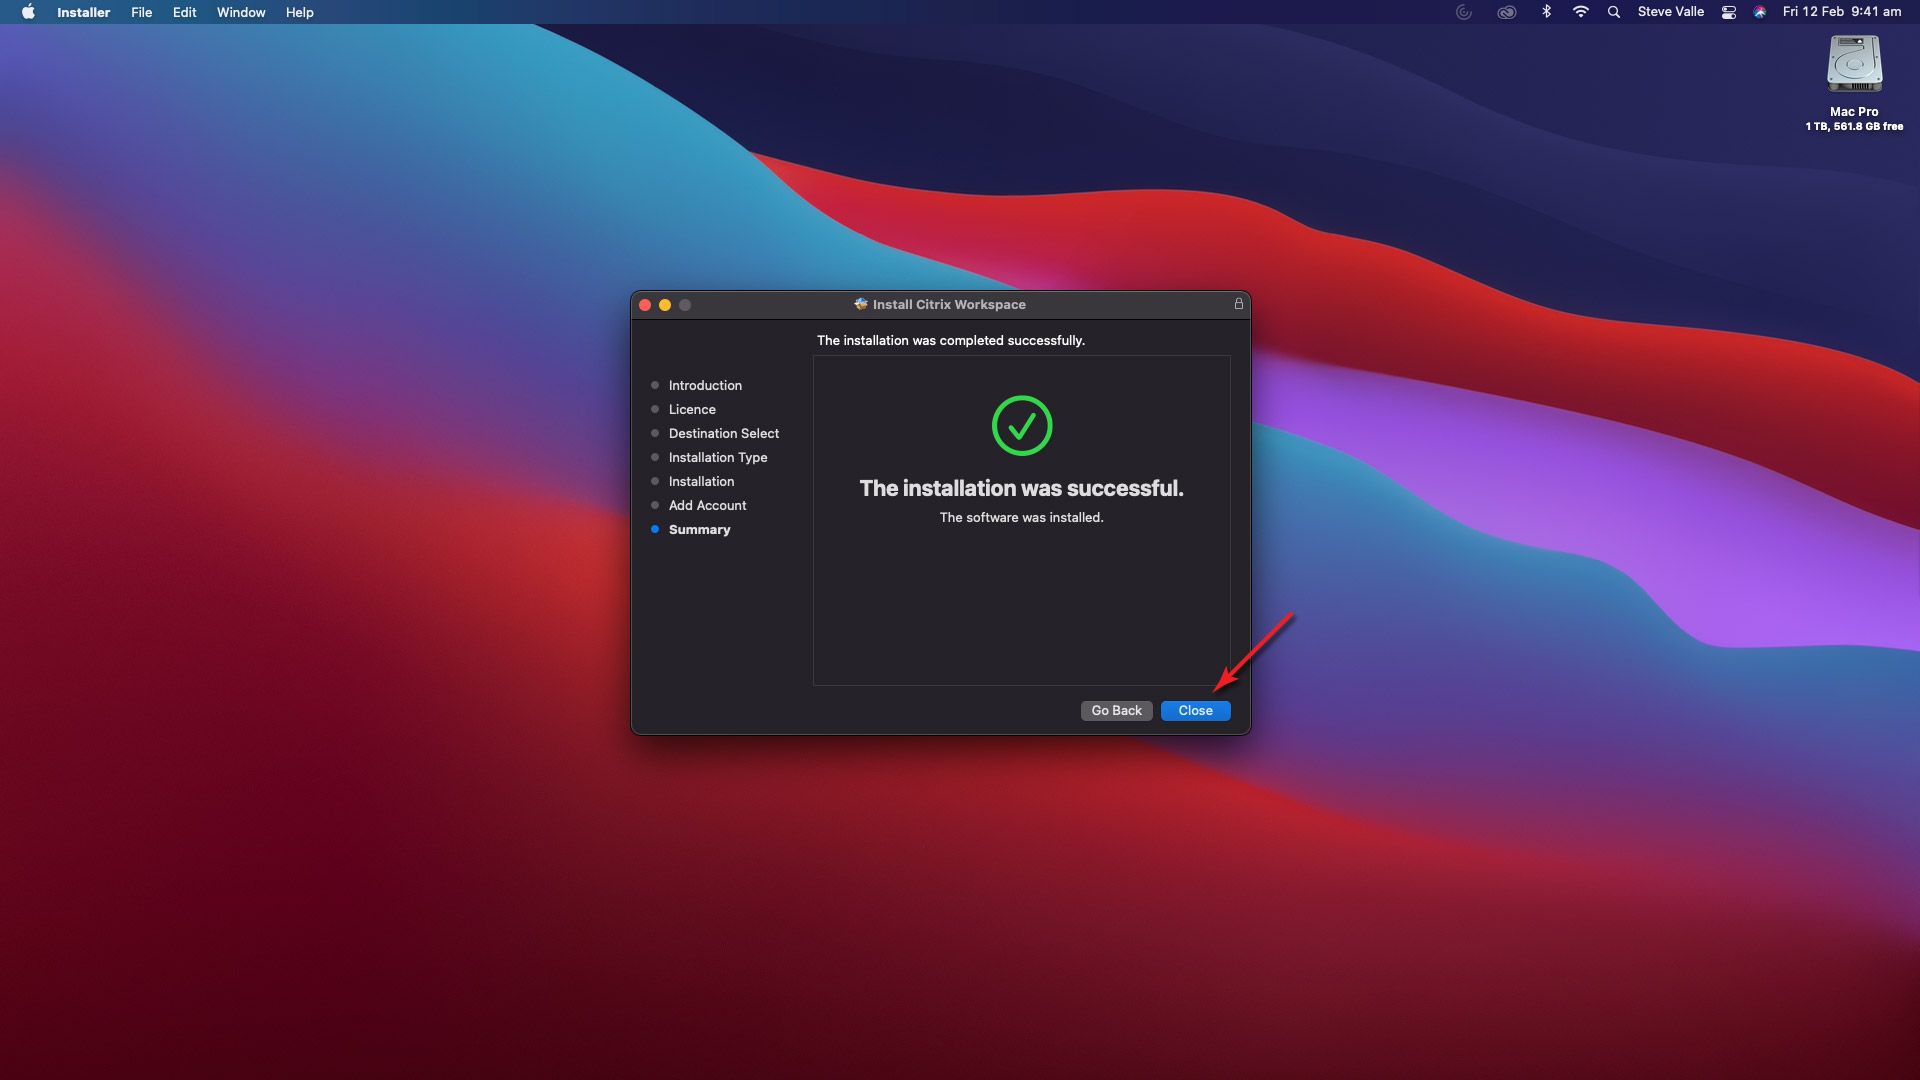 A screengrab of Citrix installation on macOS highlighting step 14 in the process